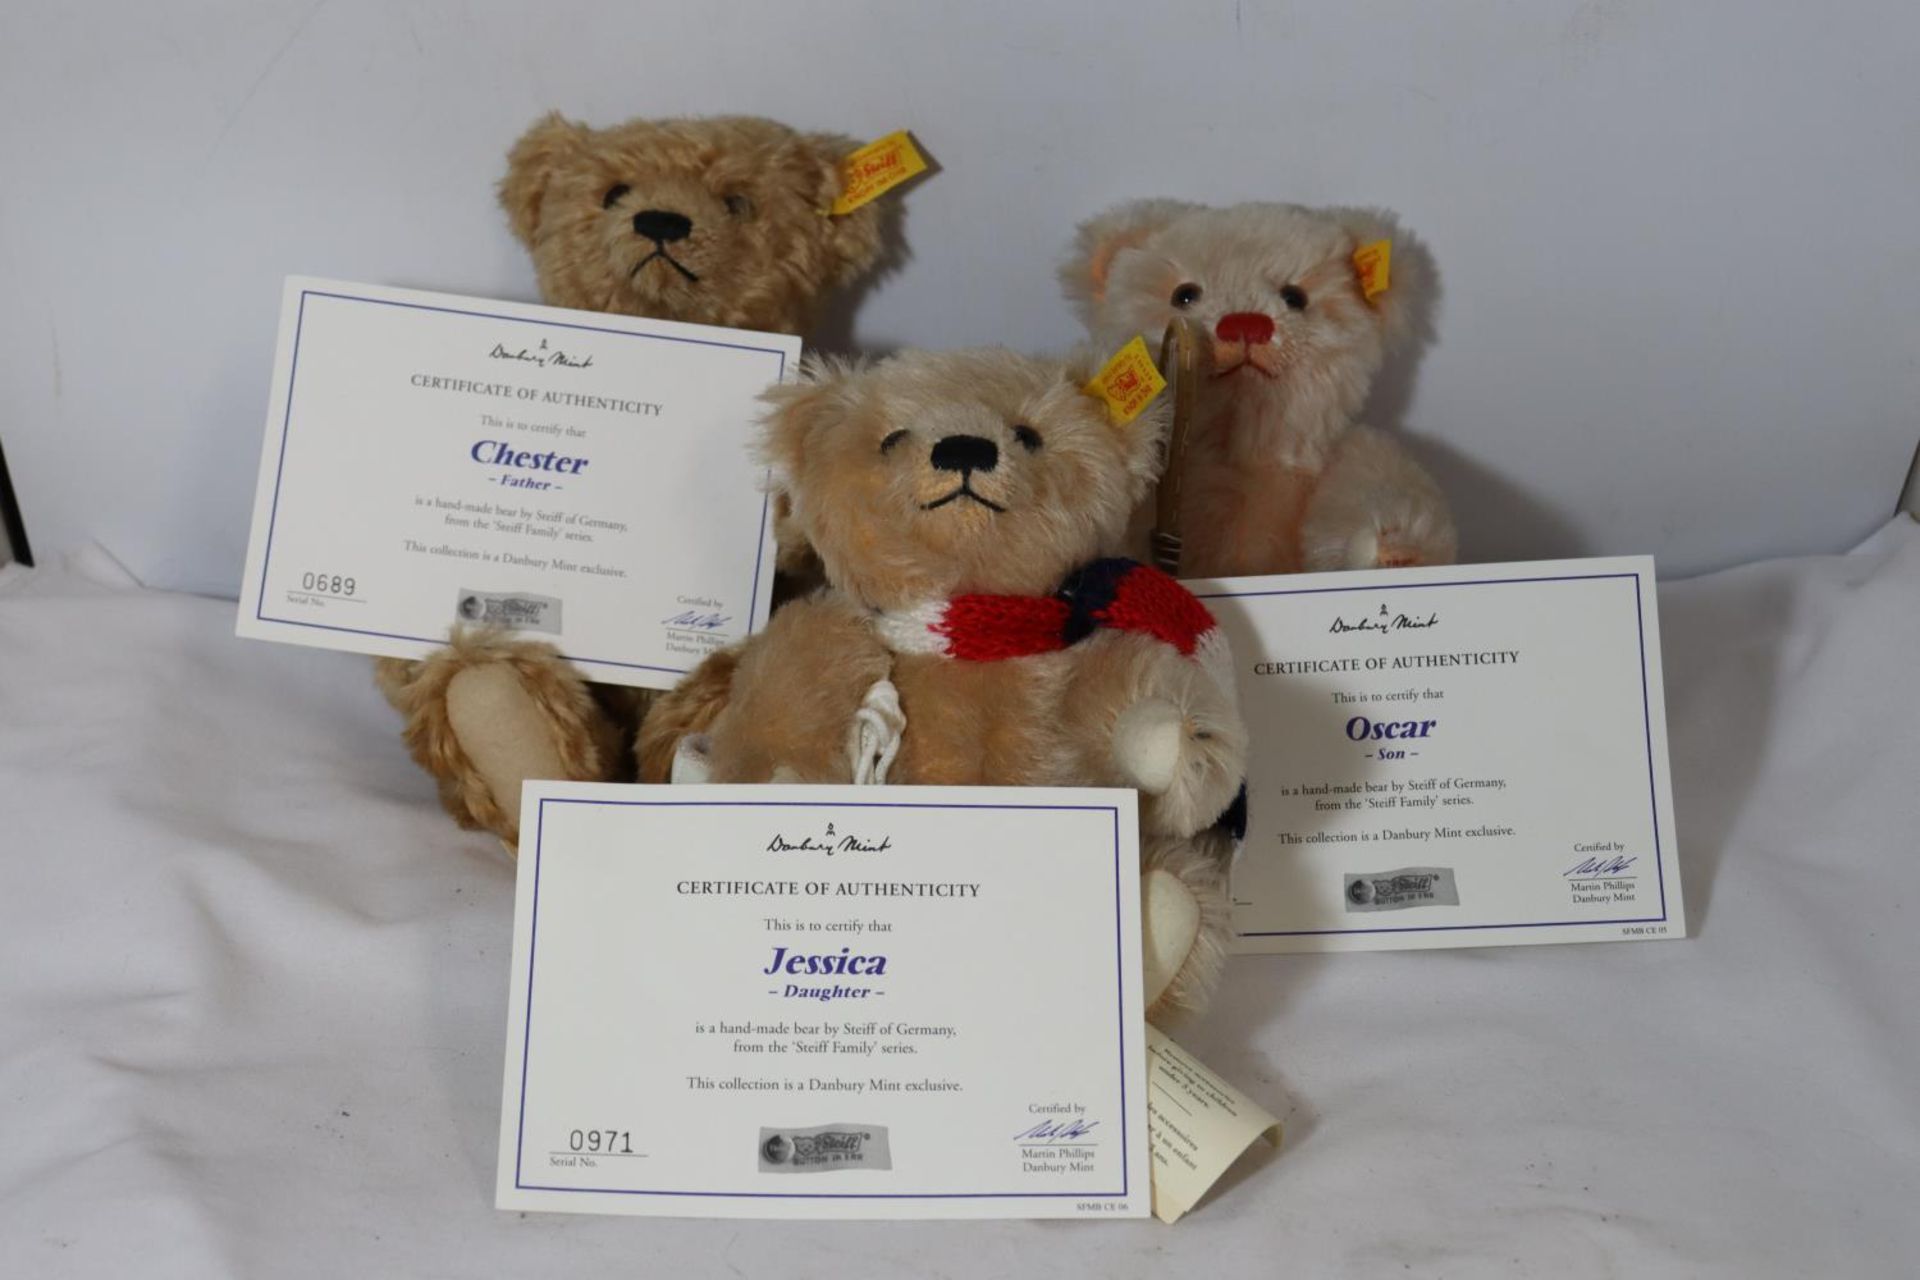 THREE STEIFF FAMILY BEARS COMPRISING OF JESSICA (DAUGHTER), CHESTER (FATHER) AND OSCAR (SON)